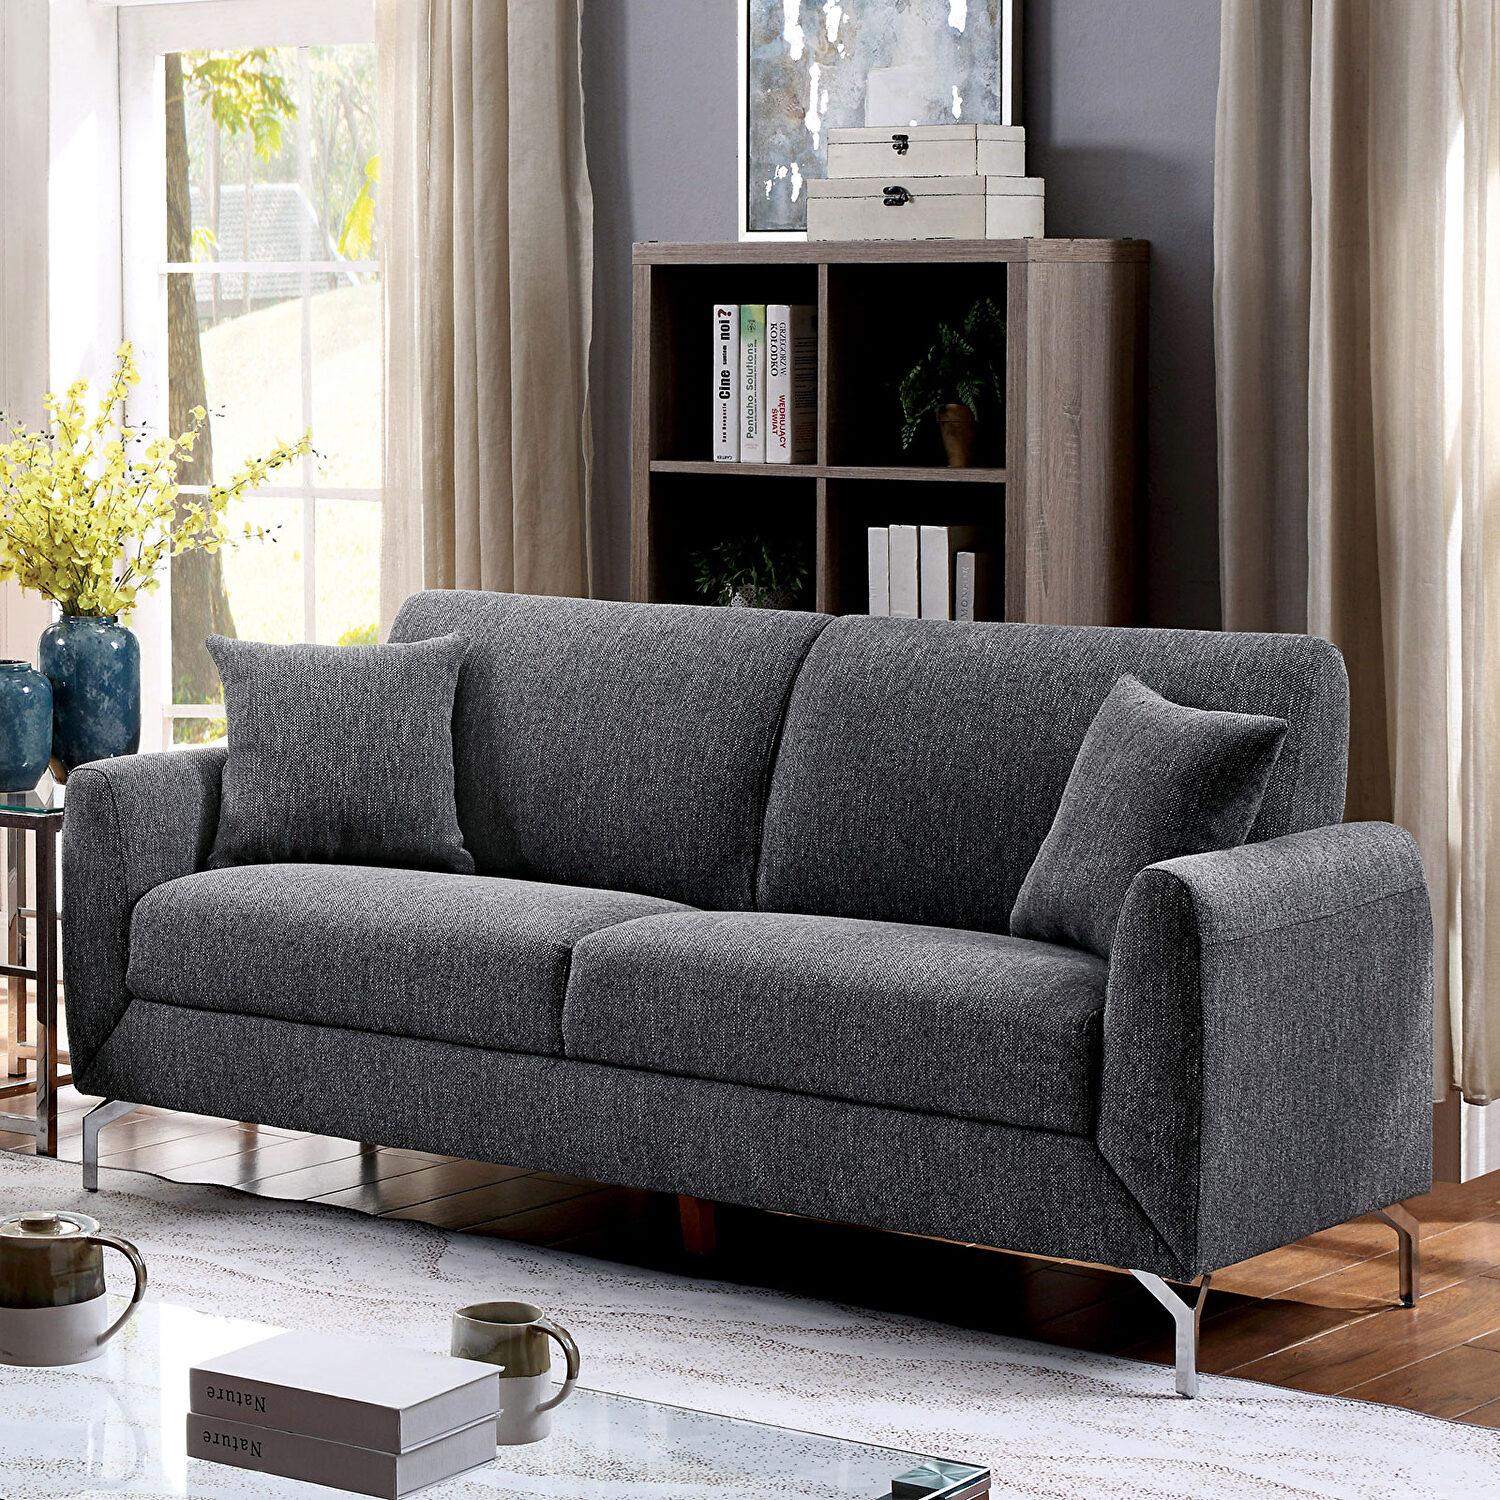 Transitional Sofa CM6088GY-SF Lauritz CM6088GY-SF in Gray Fabric